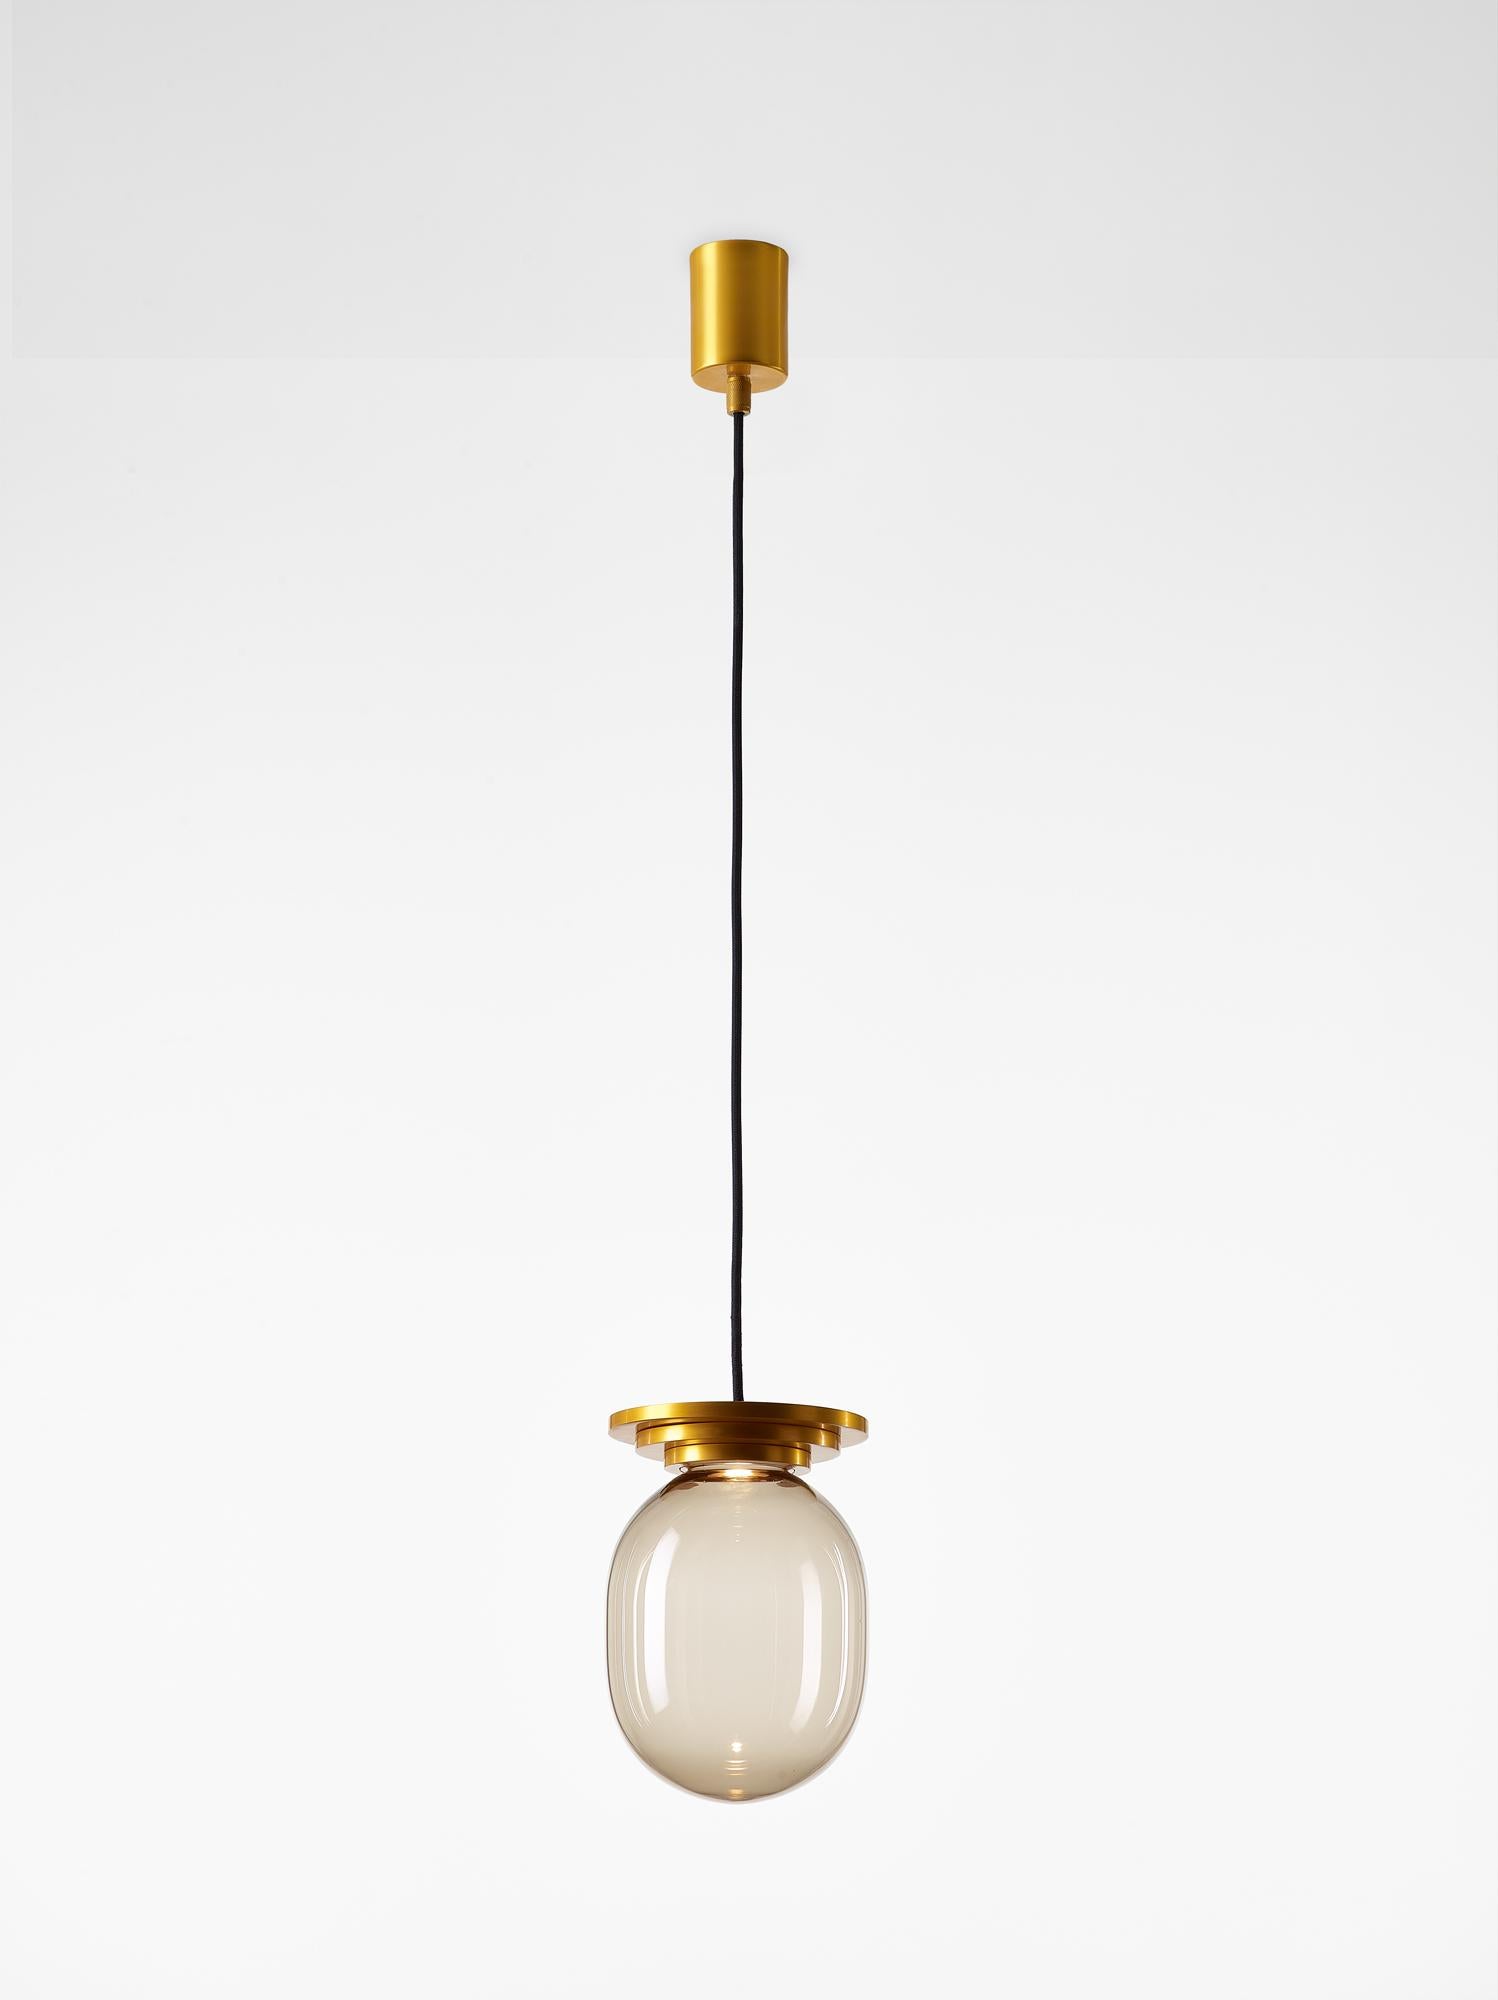 Orange Stratos big capsule pendant light by Dechem Studio
Dimensions: D 20 x H 28 cm
Materials: Aluminum, glass.
Also available: Different colours available

Different shapes of capsules and spheres contrast with anodized alloy fixtures,